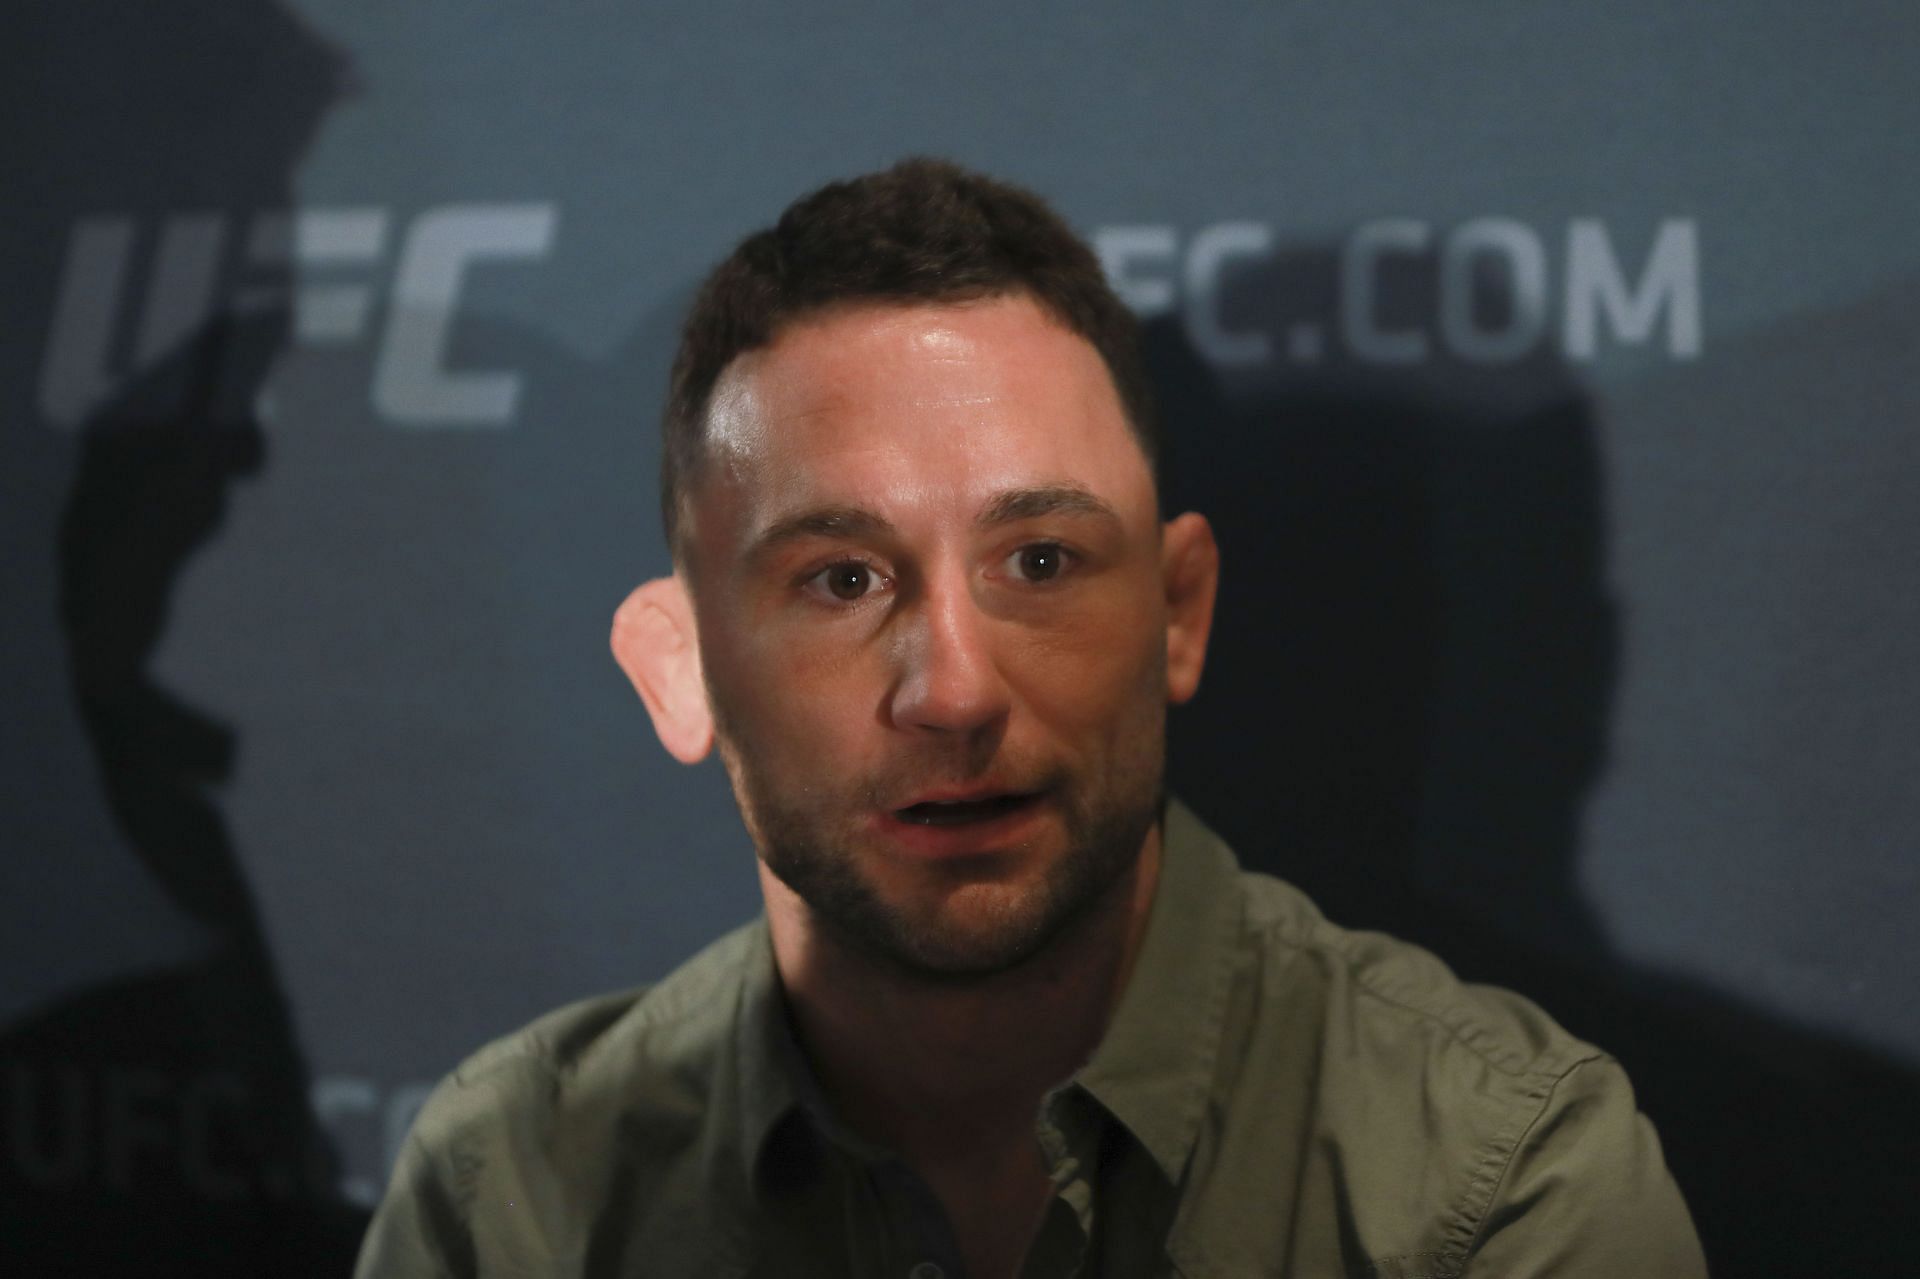 Frankie Edgar holds a record 24-10-1